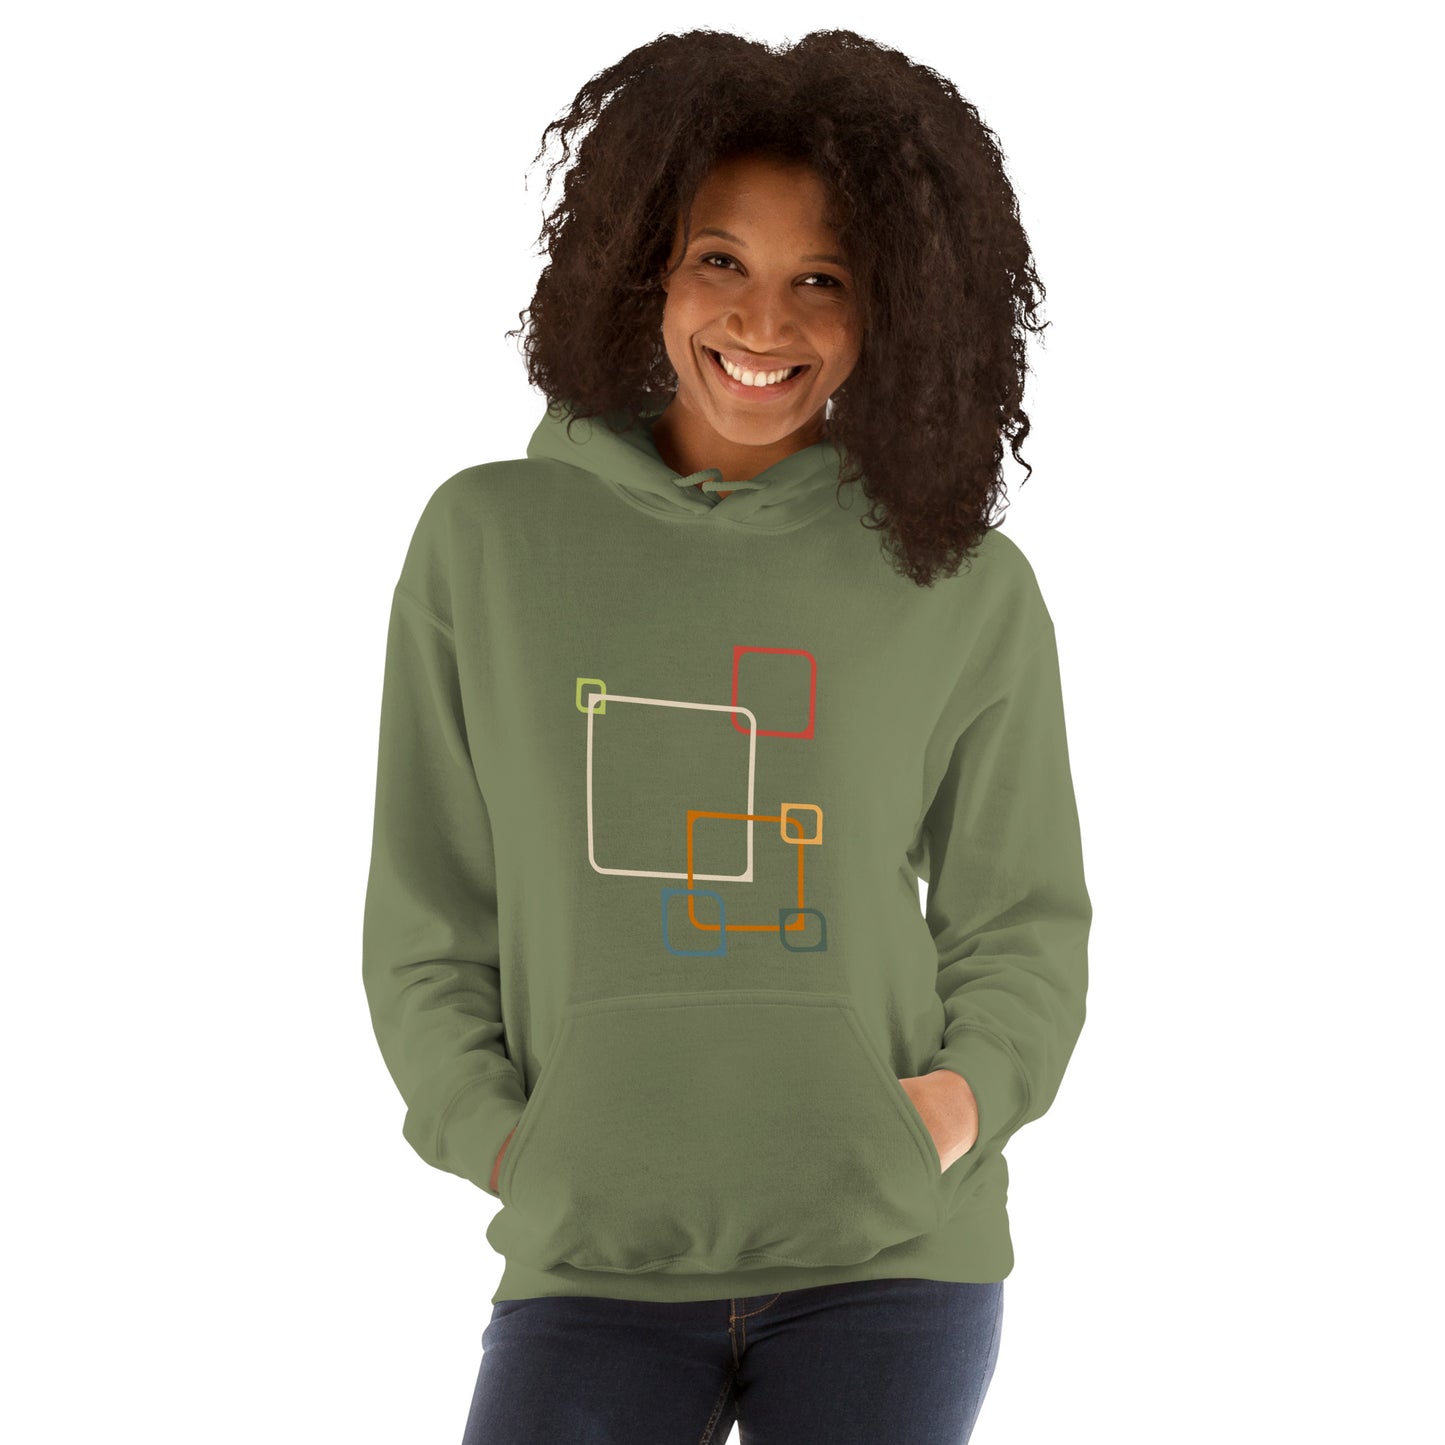 Shape, Square, Colors, Color, Random, Abstract, Organization, Perspective, Hoodie, Unisex